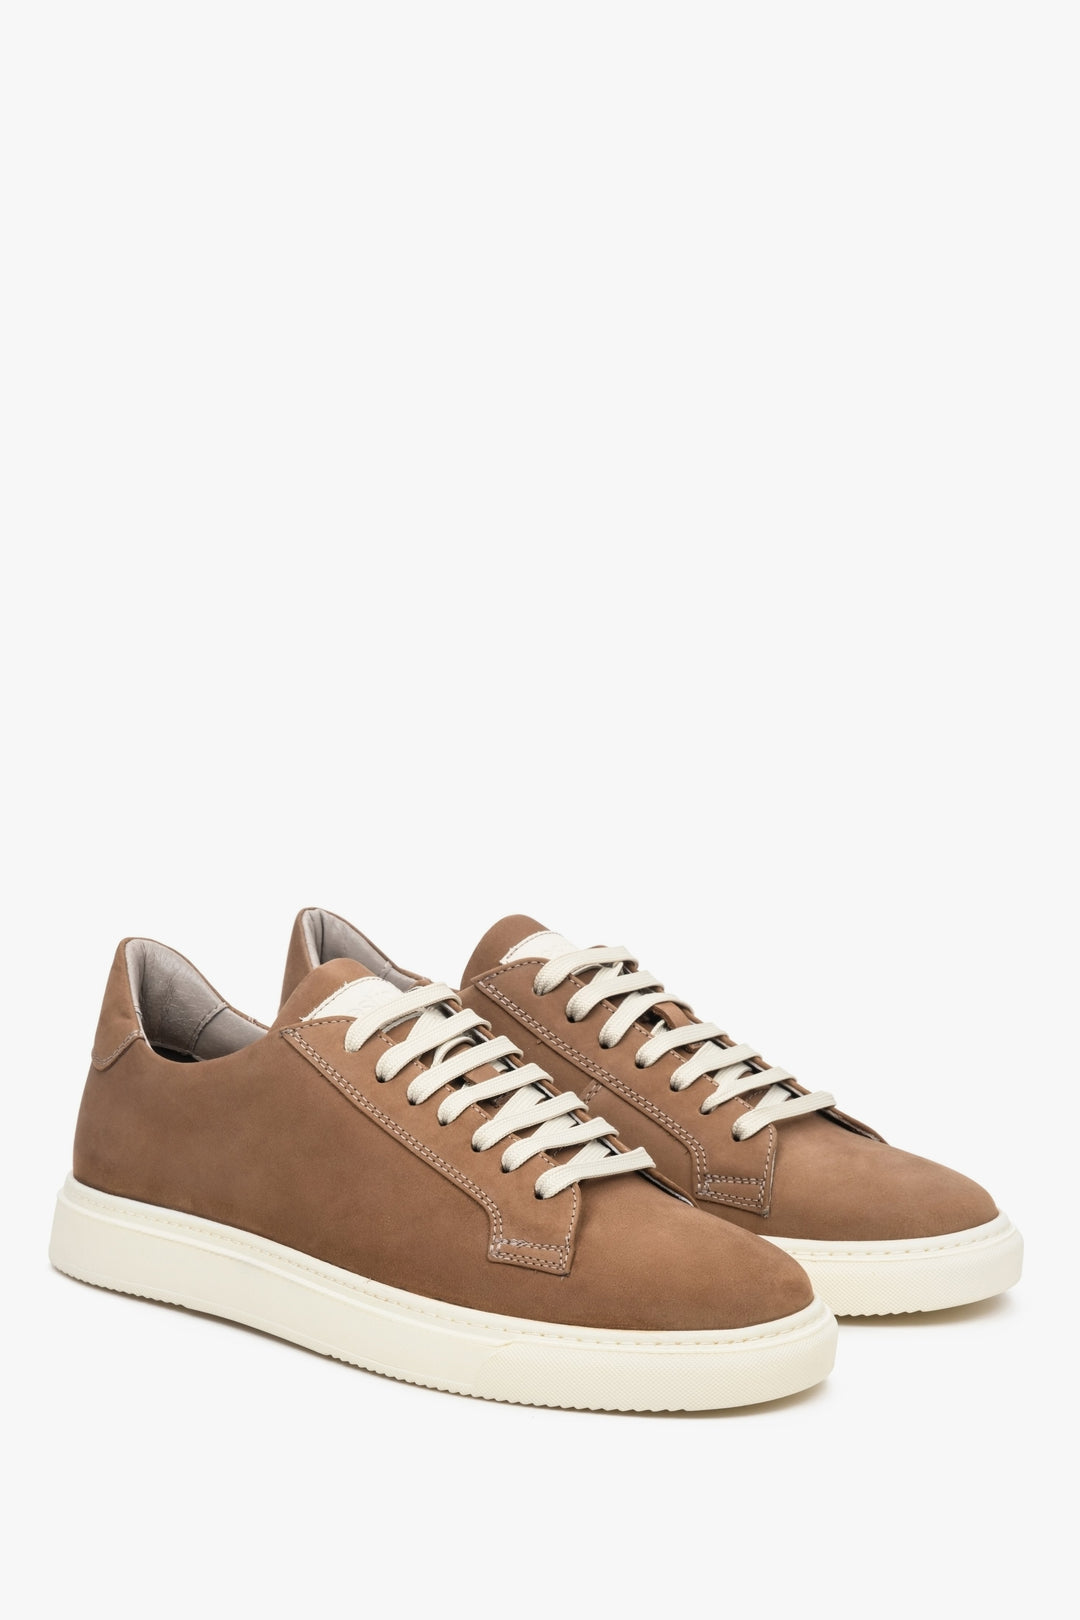 Men's Estro nubuck sneakers in brown - presentation of the top of the shoe and the side seam.